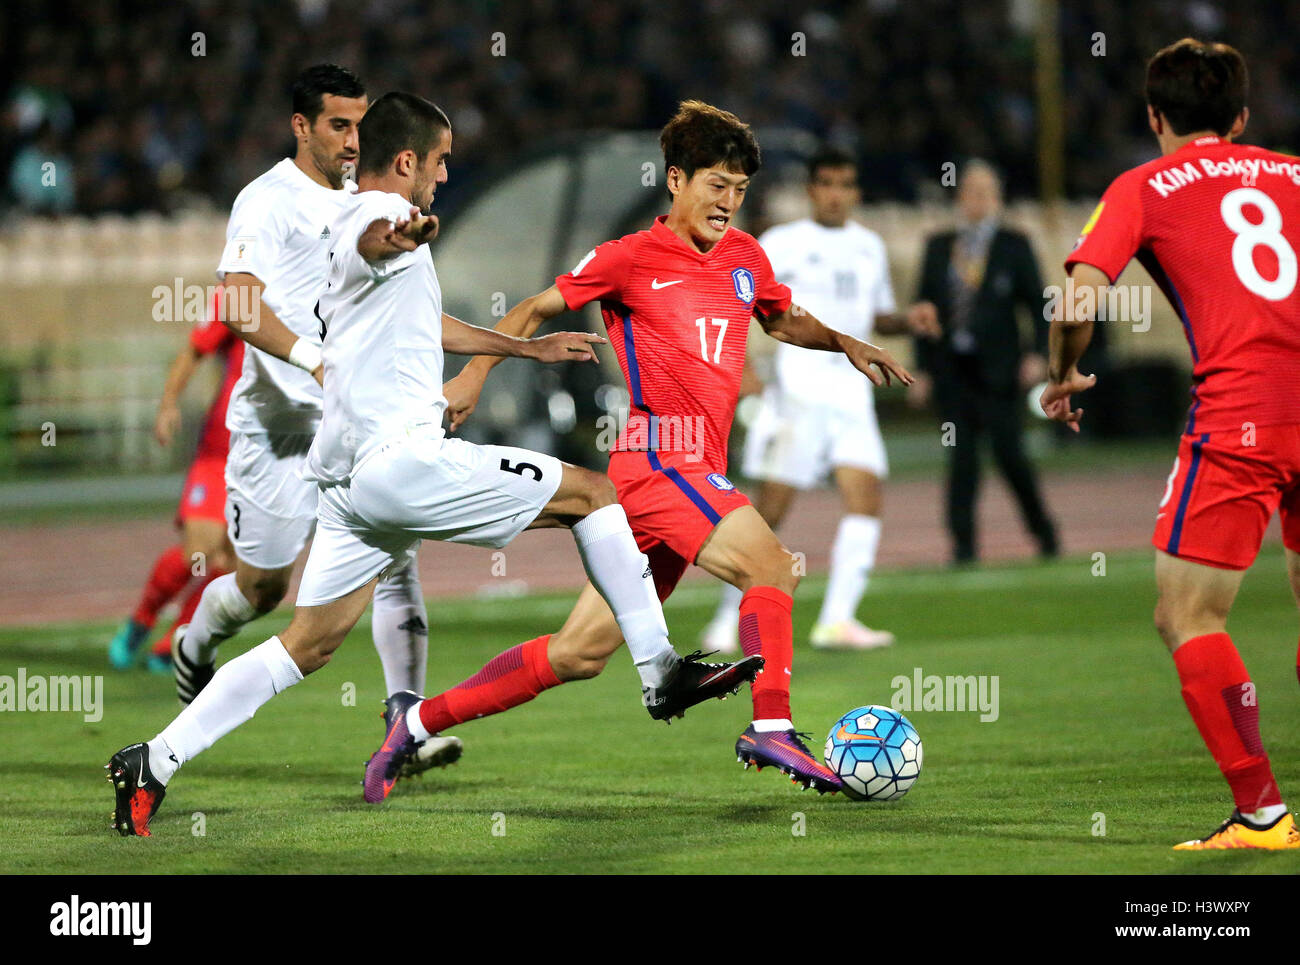 Tehran, Iran. 11th Oct, 2016. Lee Chung Yong (C) of South Korea fights for the ball during the FIFA World Cup 2018 Asian qualification football match between Iran and South Korea at Azadi Stadium in Tehran, Iran, Oct. 11, 2016. Iran won 1-0. © Ahmad Halabisaz/Xinhua/Alamy Live News Stock Photo